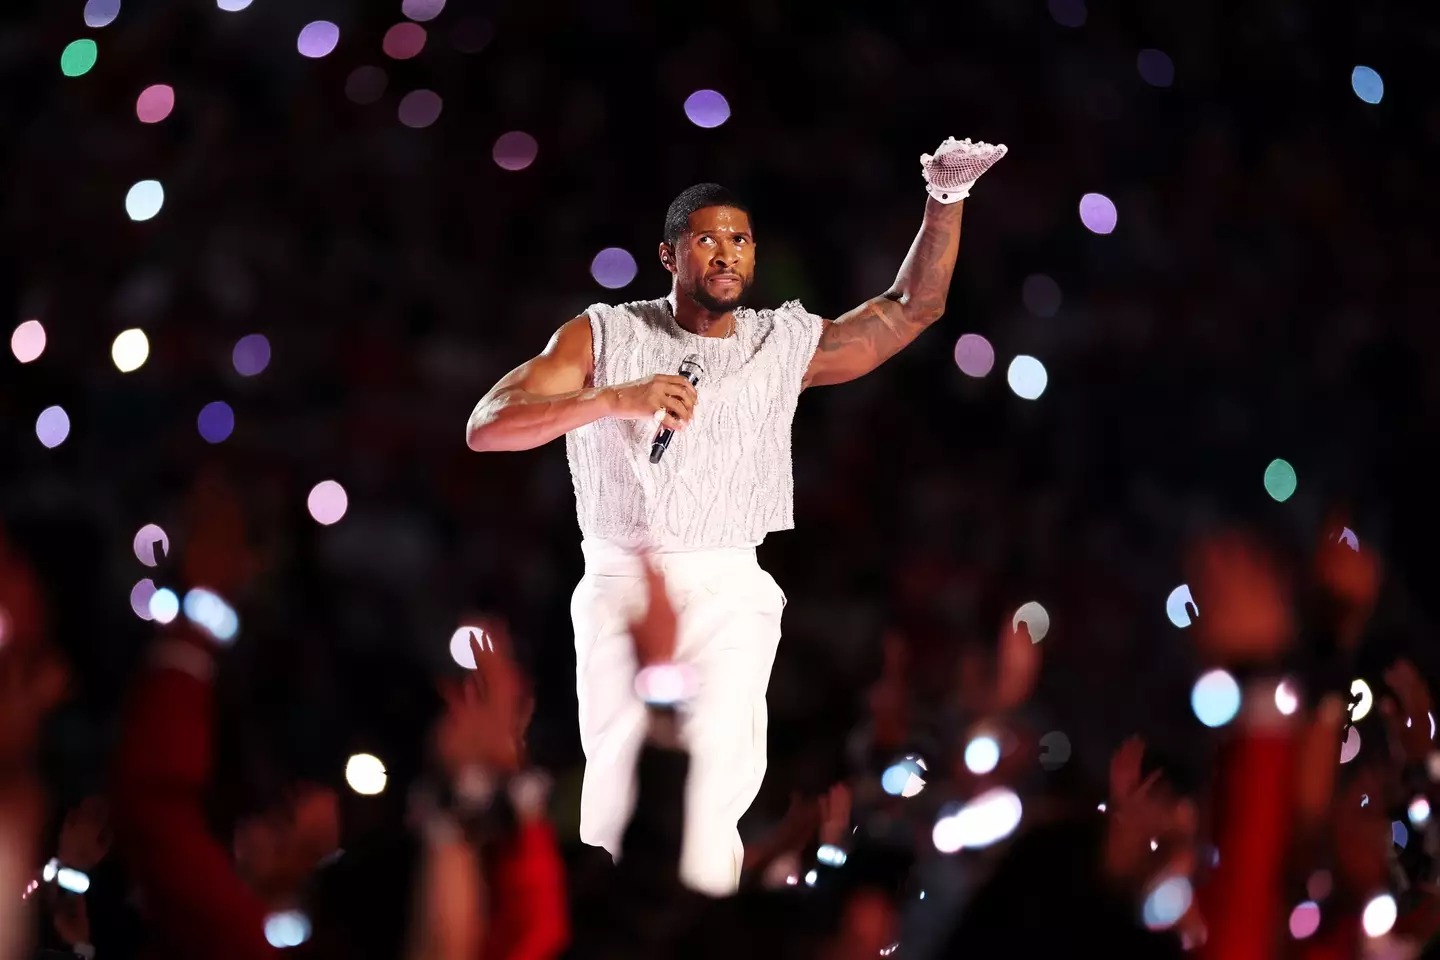 Music fans went wild for Usher's performance.